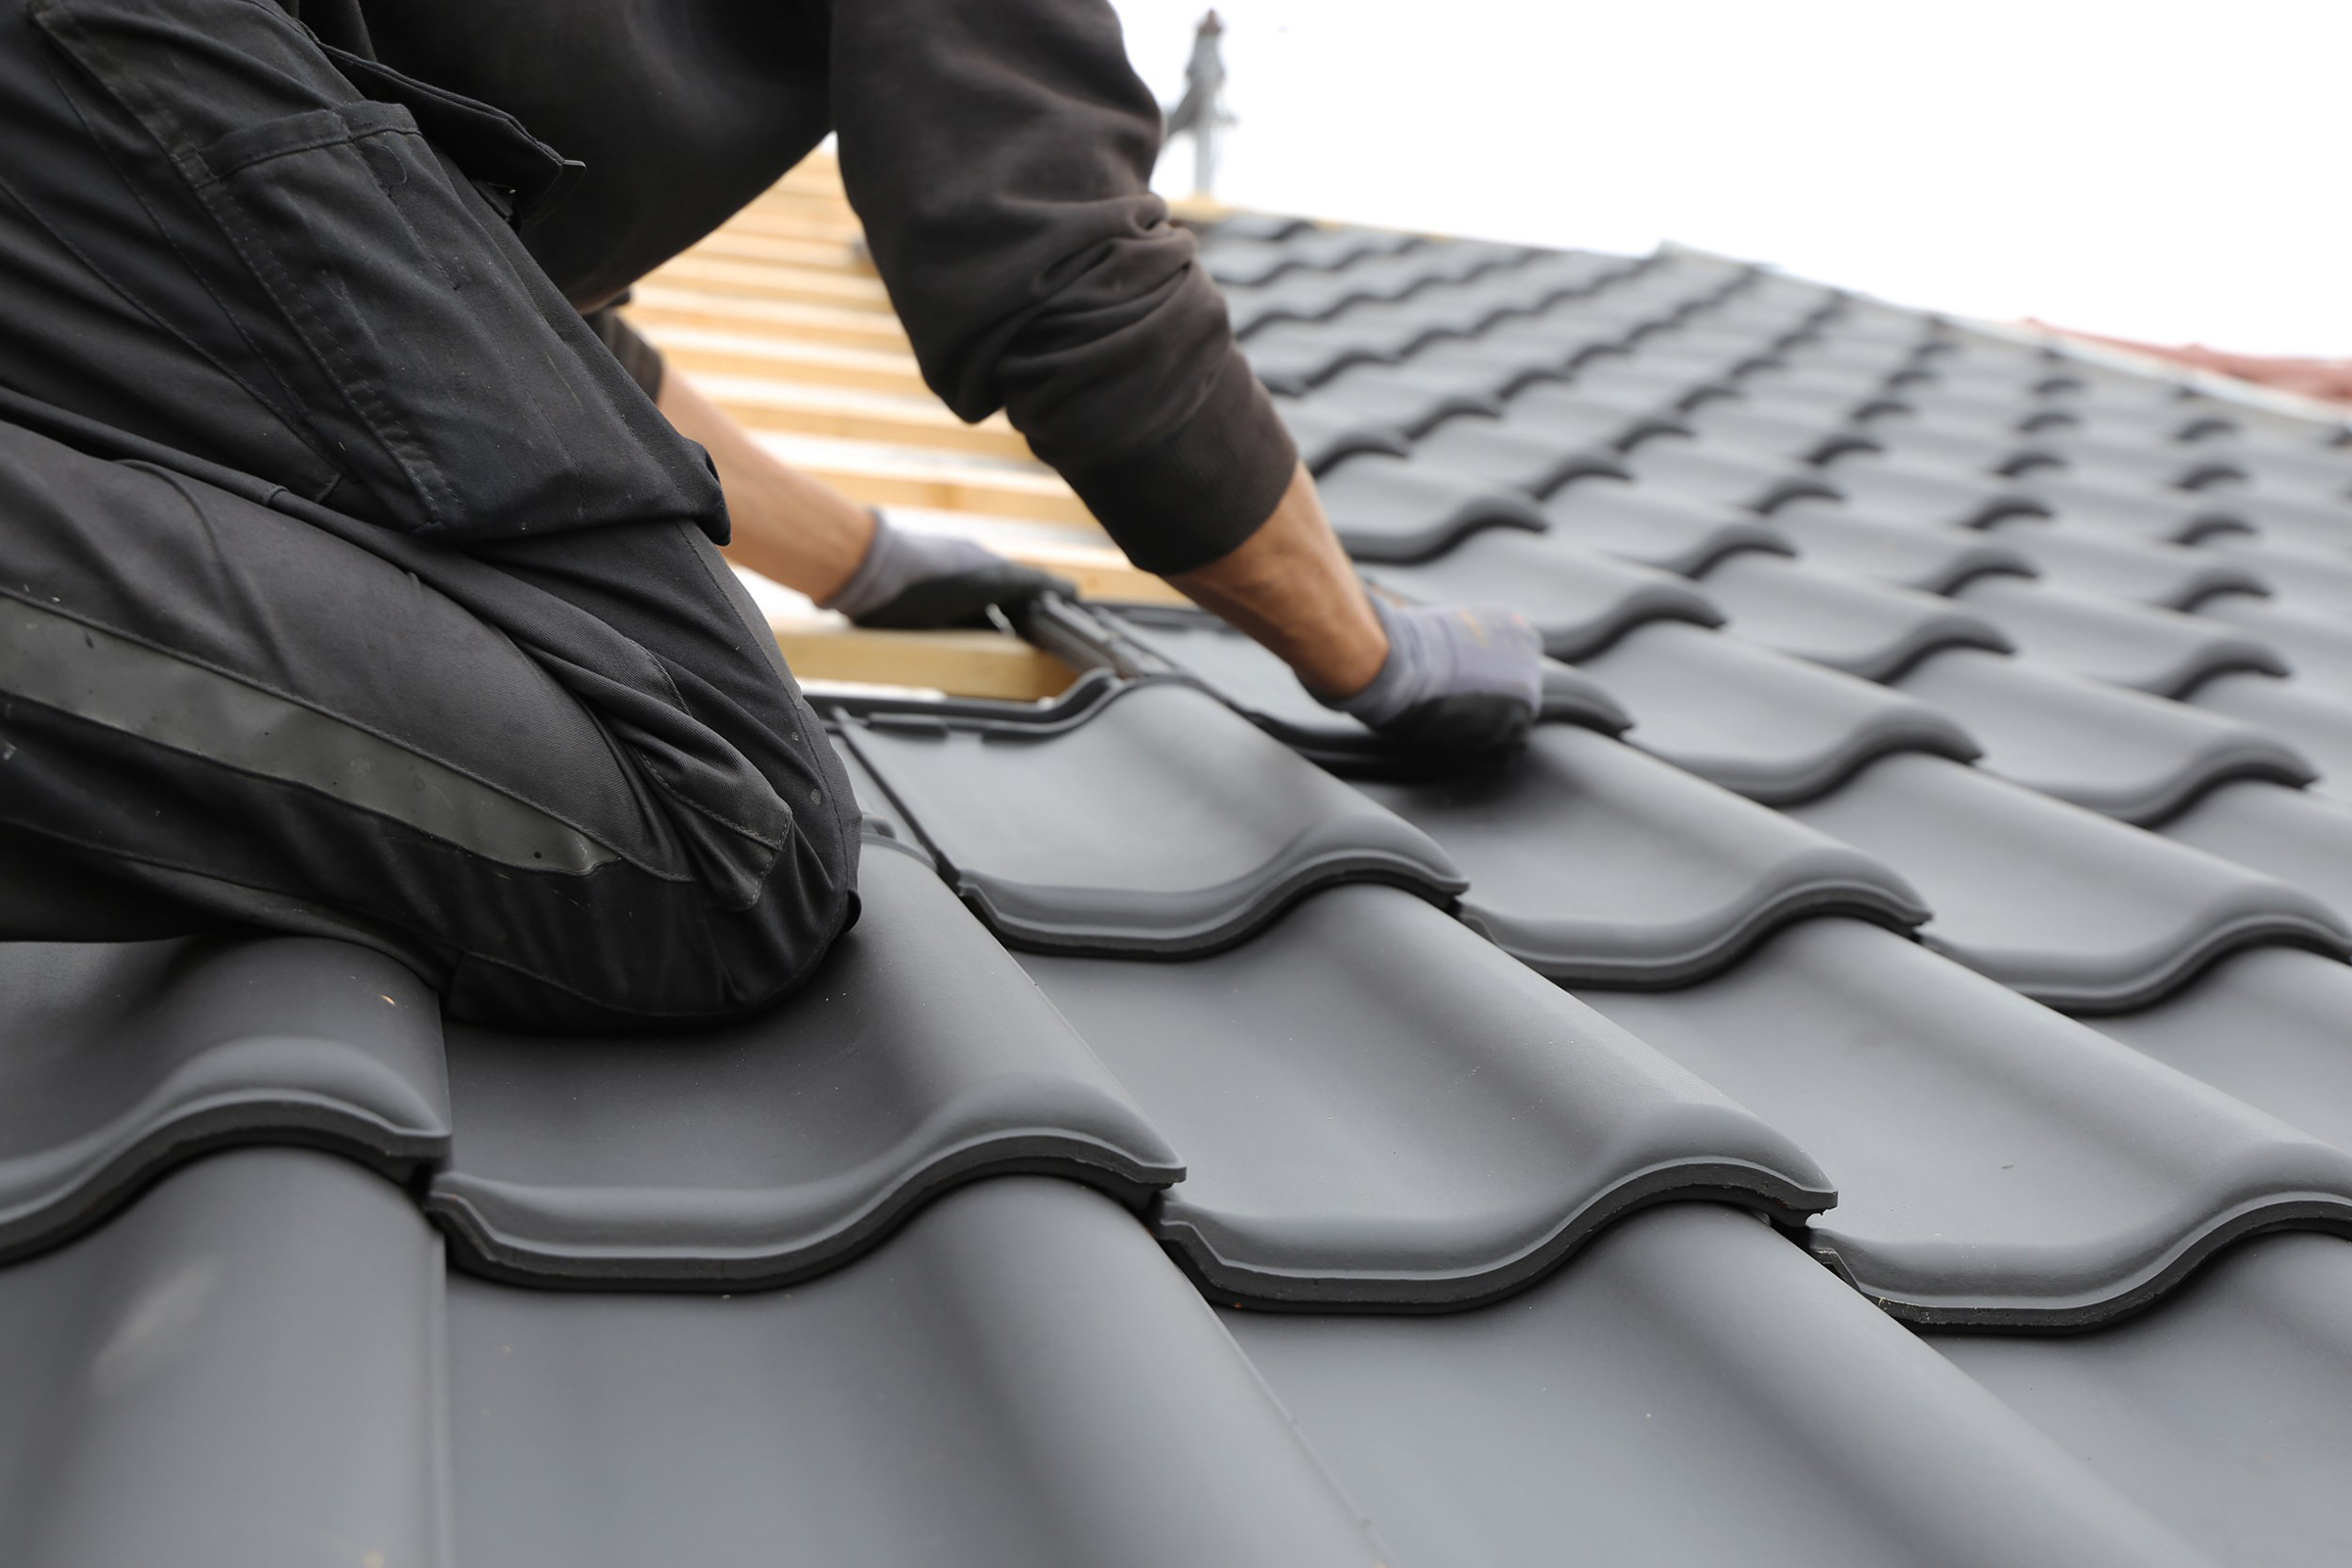 ProRoofing service can make any necessary repair to your roof in a cost-effective, professional manner.